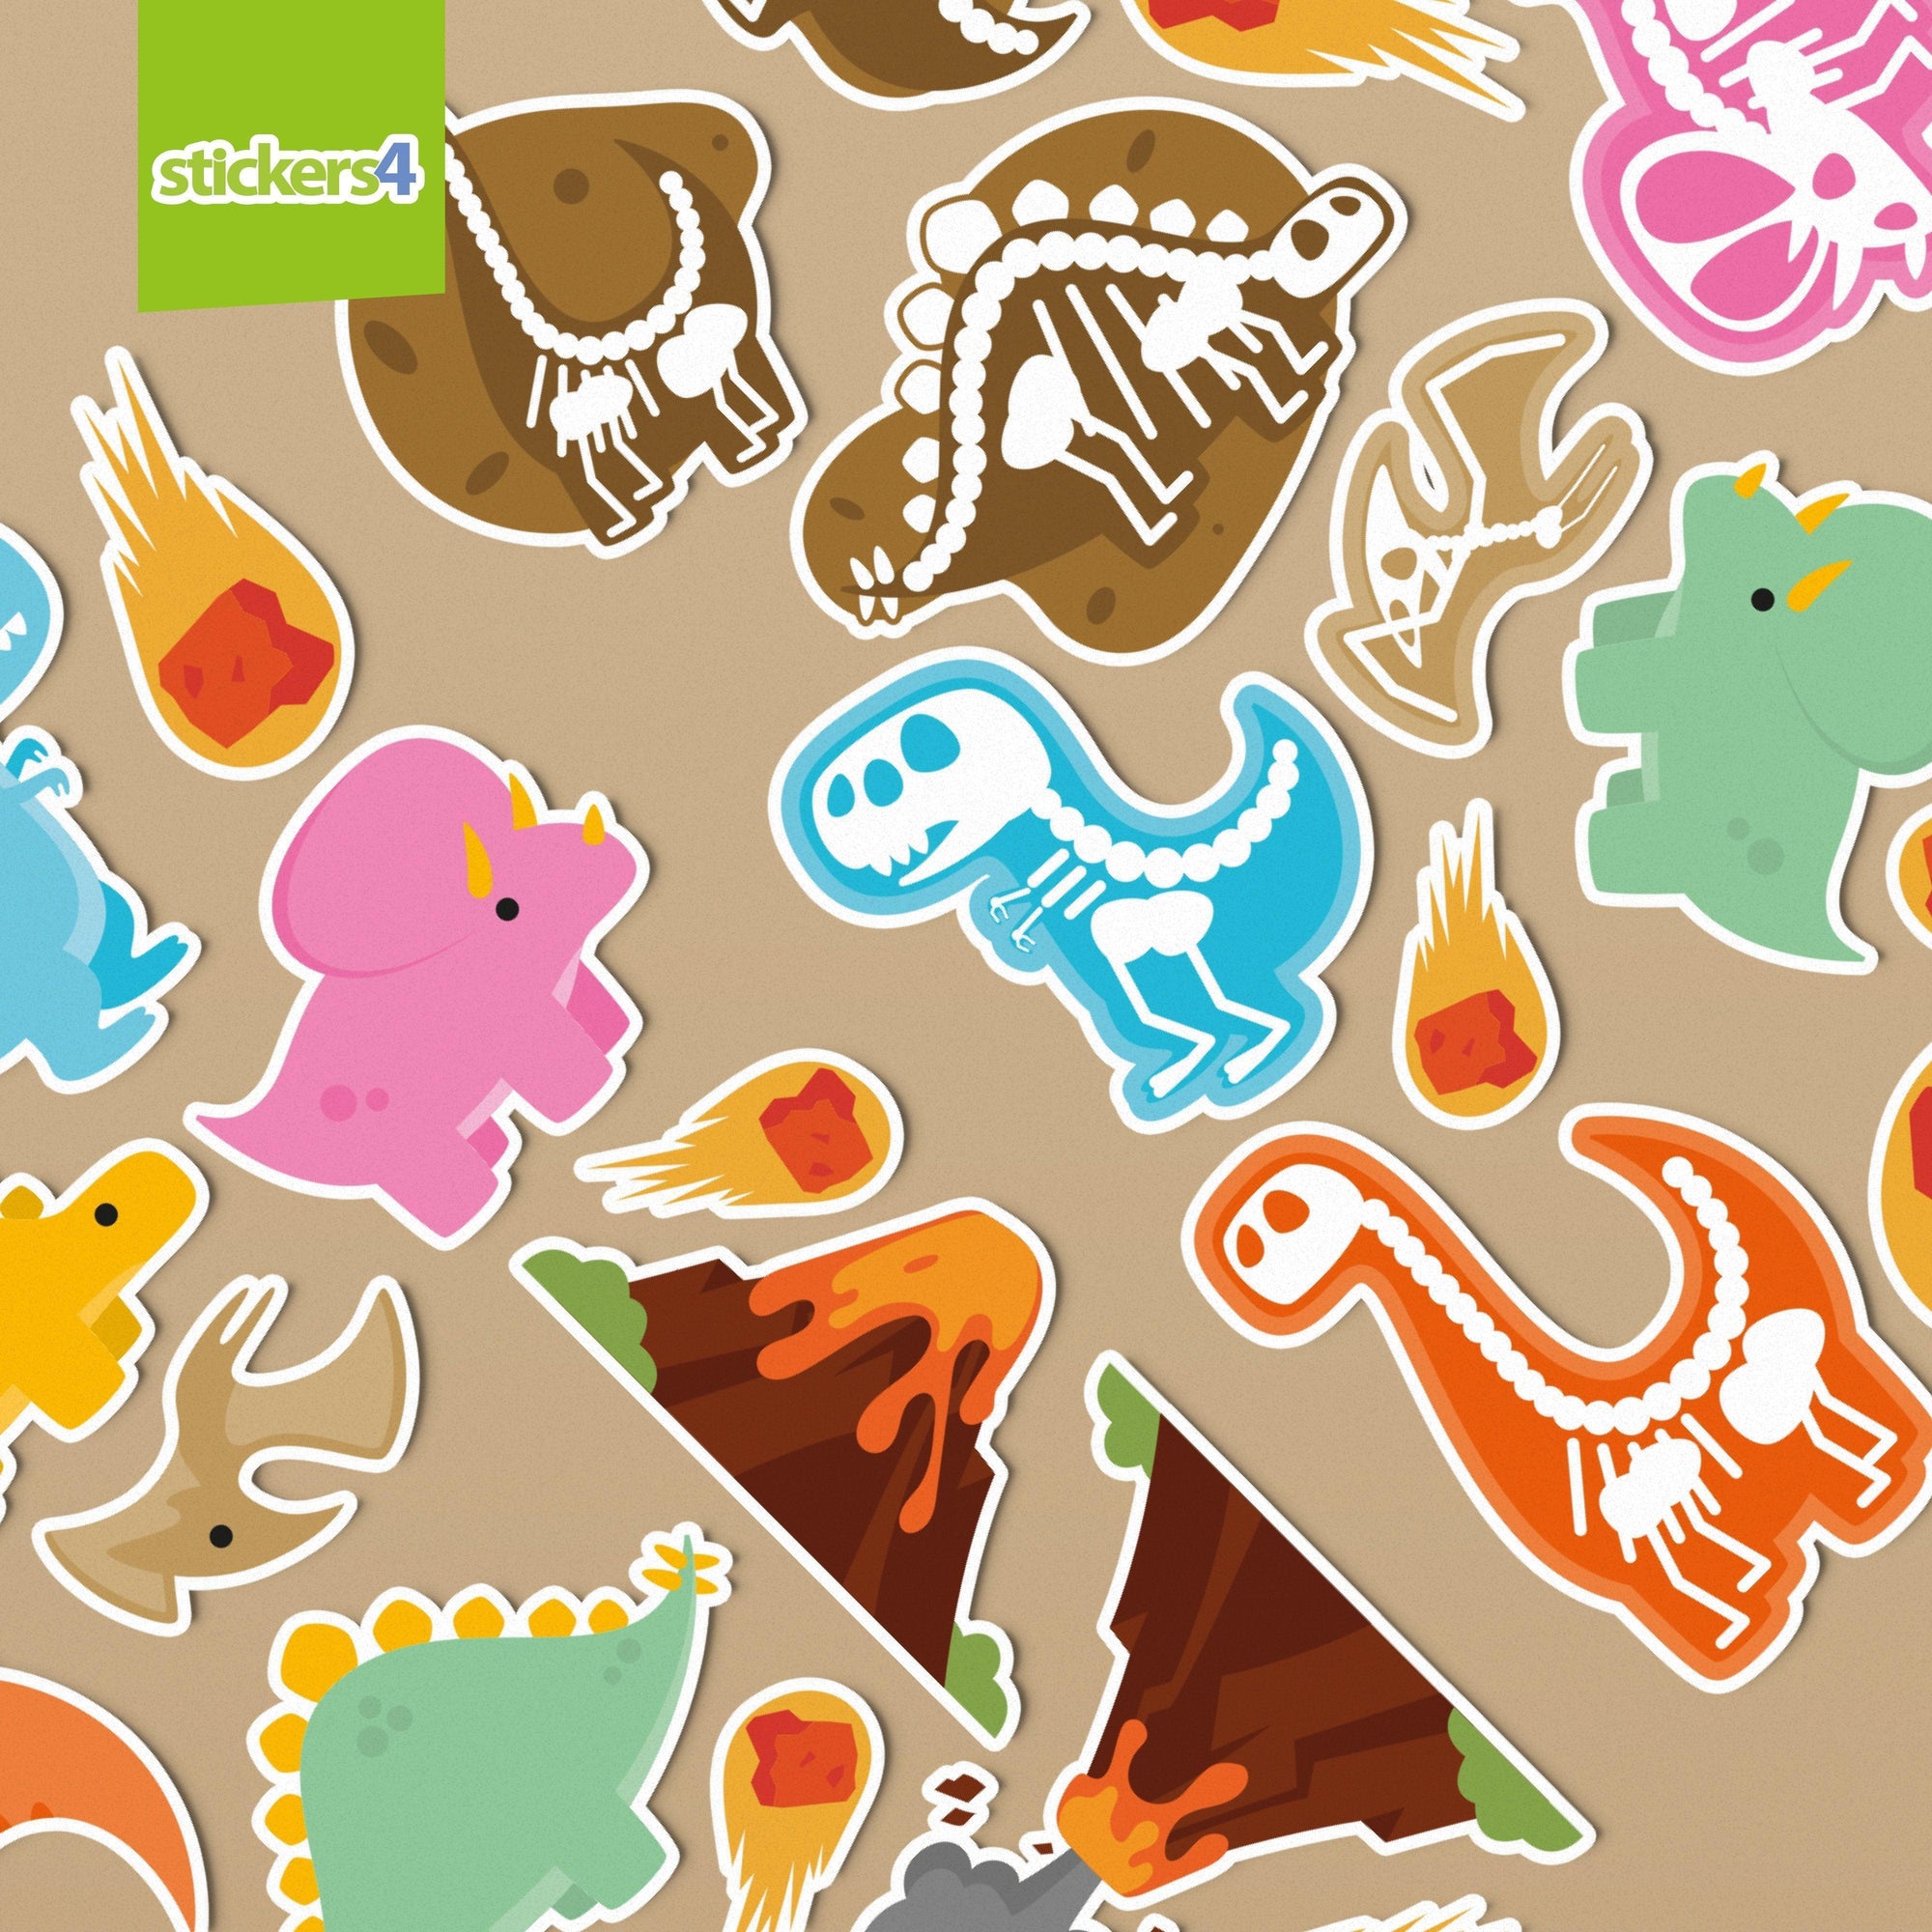 Dinosaur and Fossil Sticker Pack - Perfect Stocking Filler Laptop Sticker